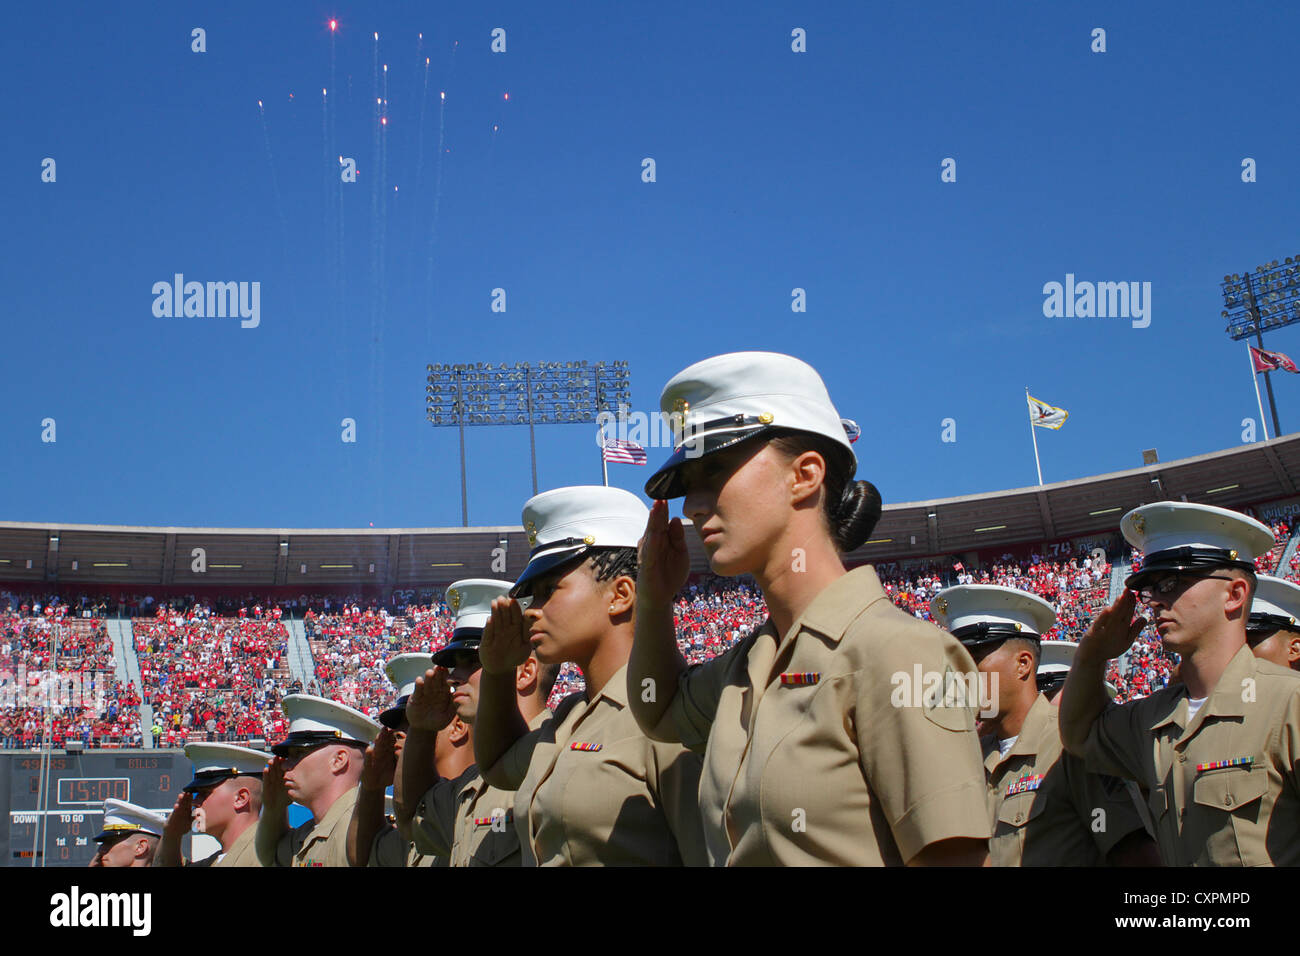 Lance Cpl. Leeana Richey, a motor transport operator serving with the 13th Marine Expeditionary Unit for San Francisco Fleet Week 2012, salutes during the singing of the national anthem at the 49ers game, Oct. 7, 2012. The U.S. Marines, sailors, coast guardsmen and members of the Royal Canadian Navy received a standing ovation as they left the field. Richey is a native of Indian Town, Fla., and is stationed at Marine Corps Base Camp Pendleton, Calif. Stock Photo